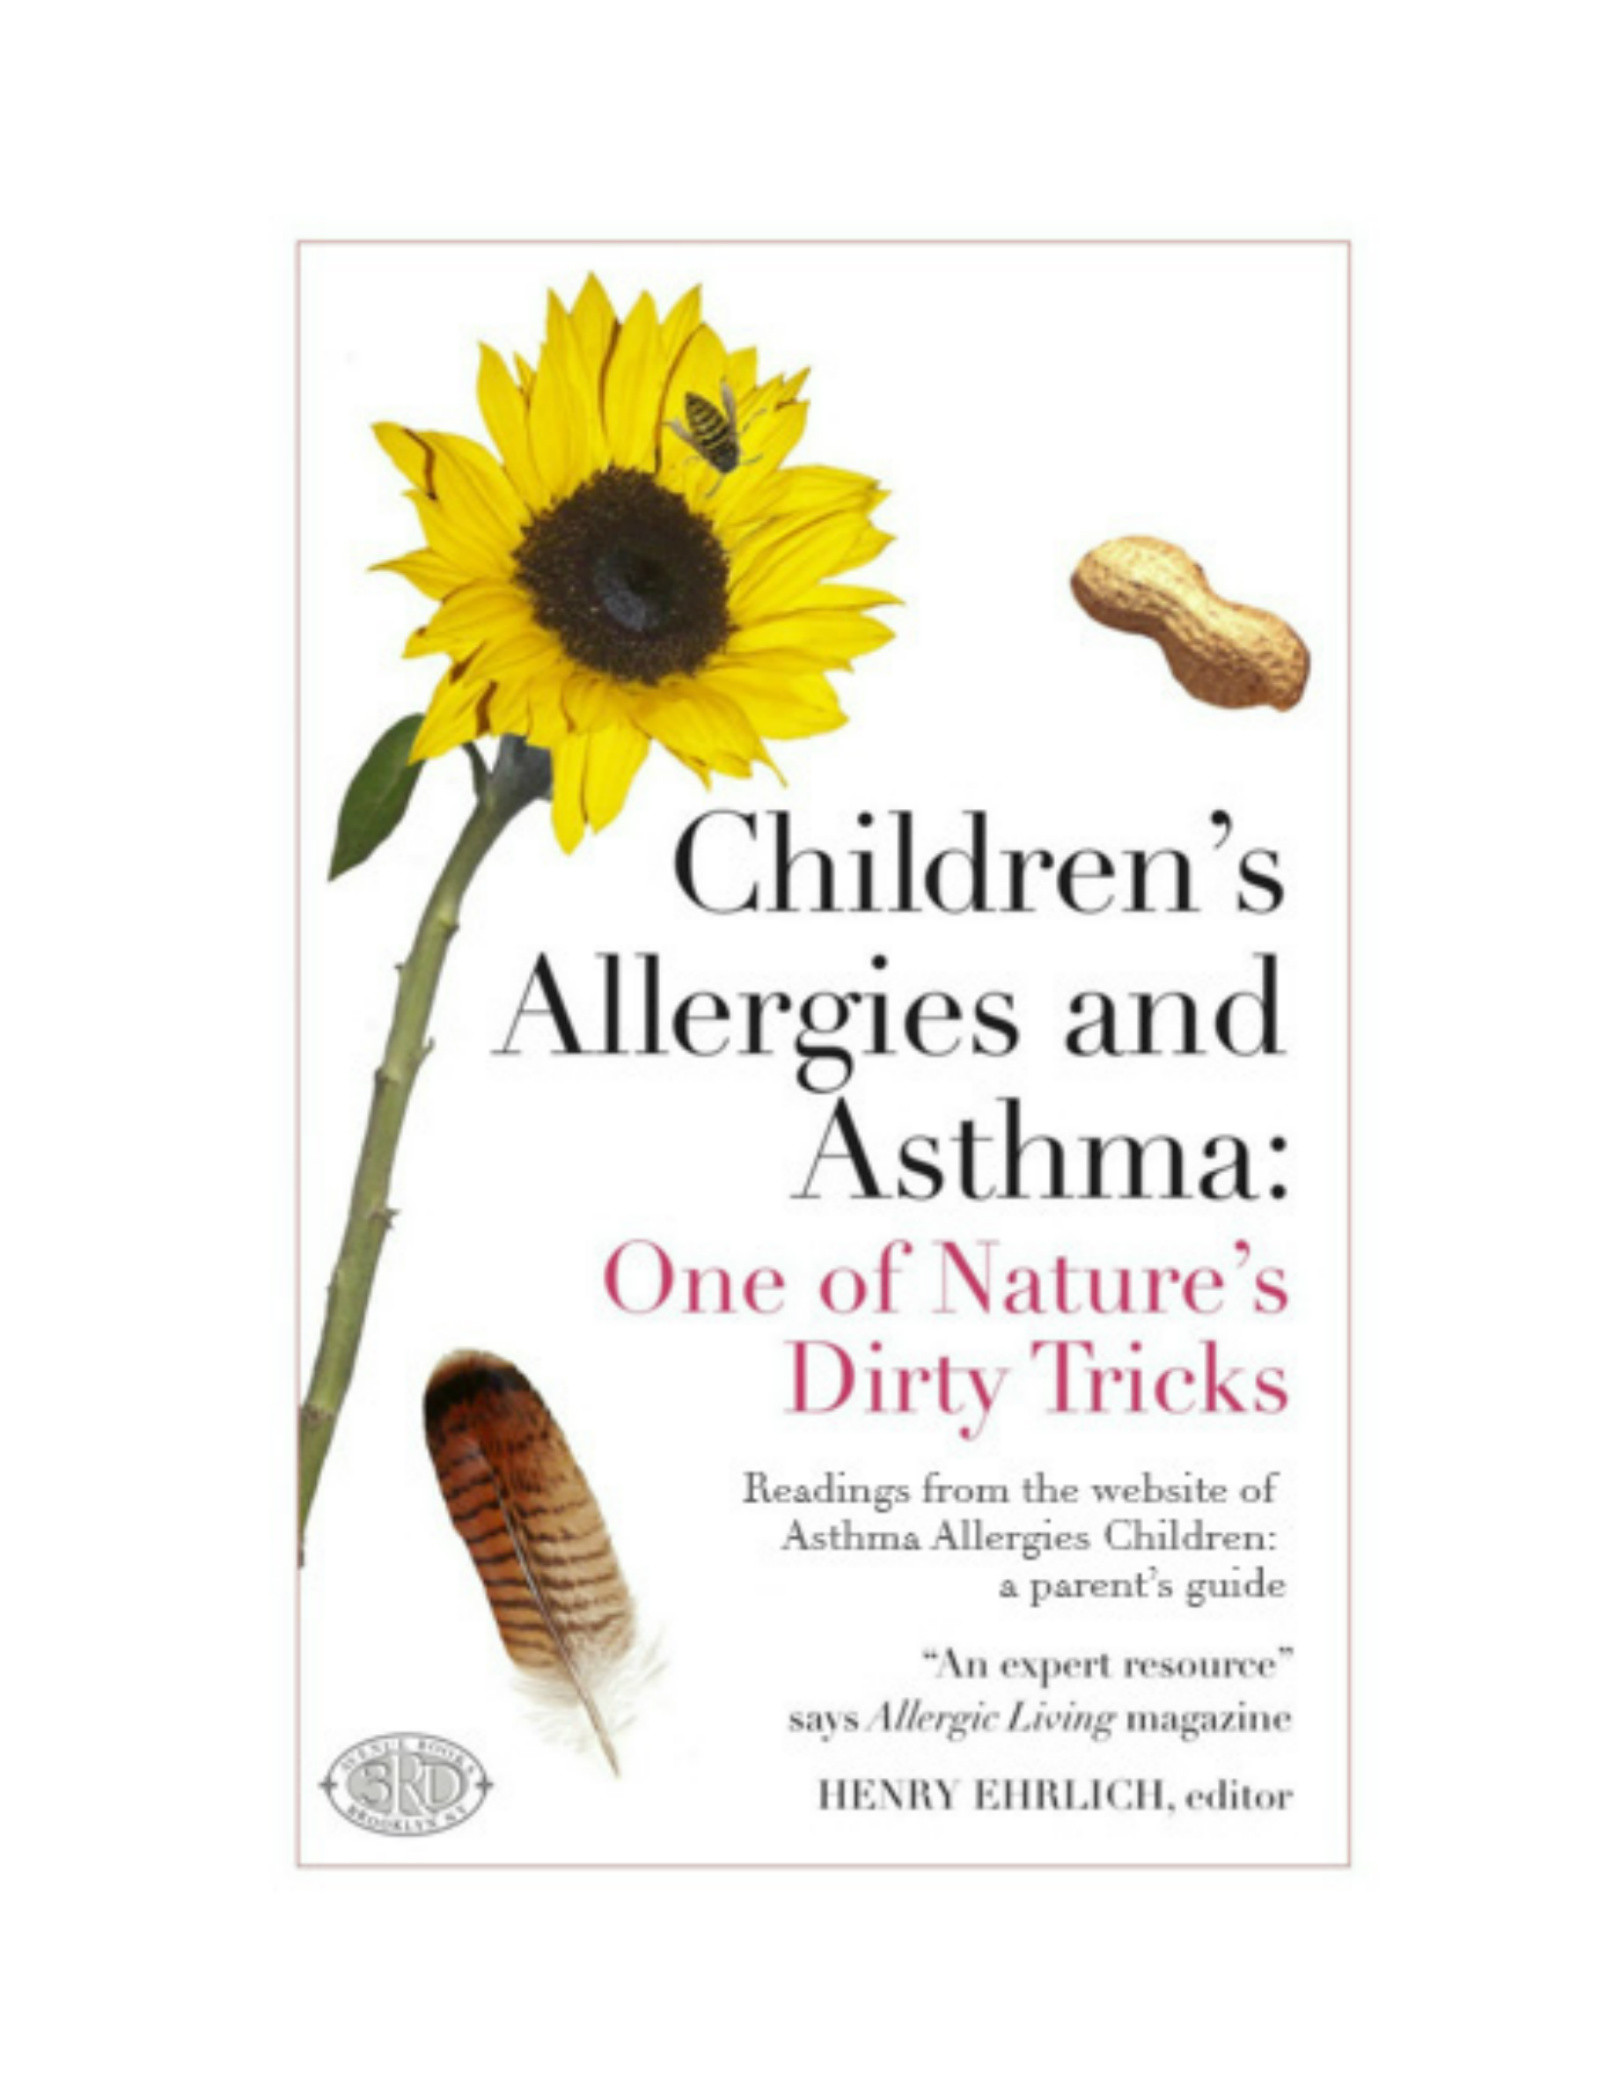 Children's Allergies and Asthma